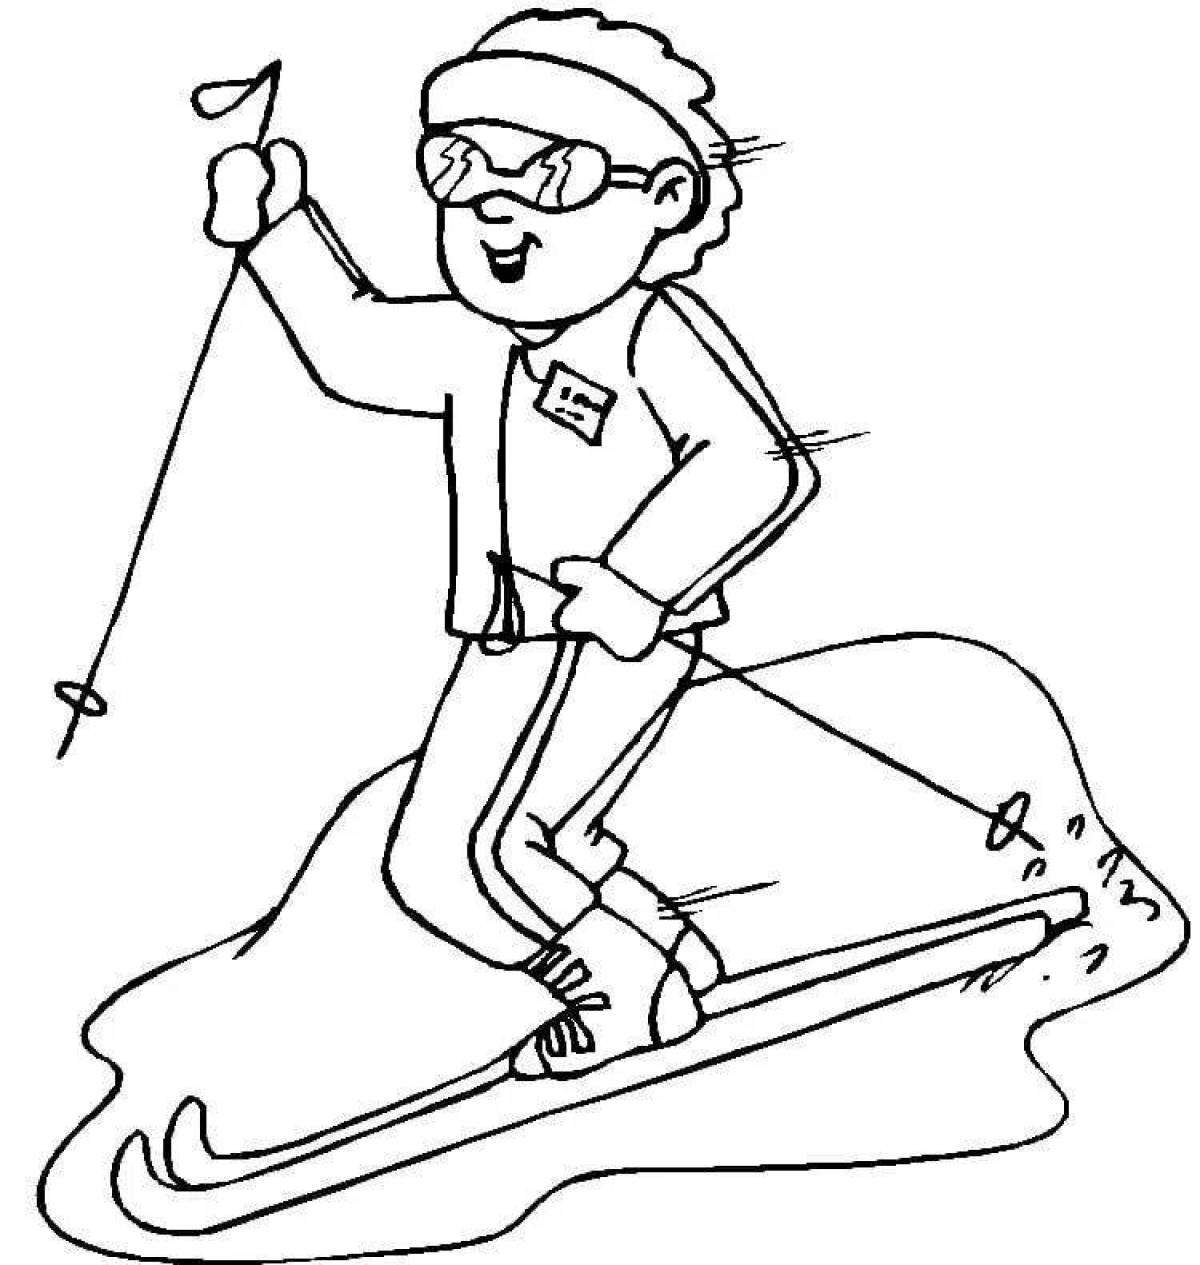 Awesome coloring book for skiing